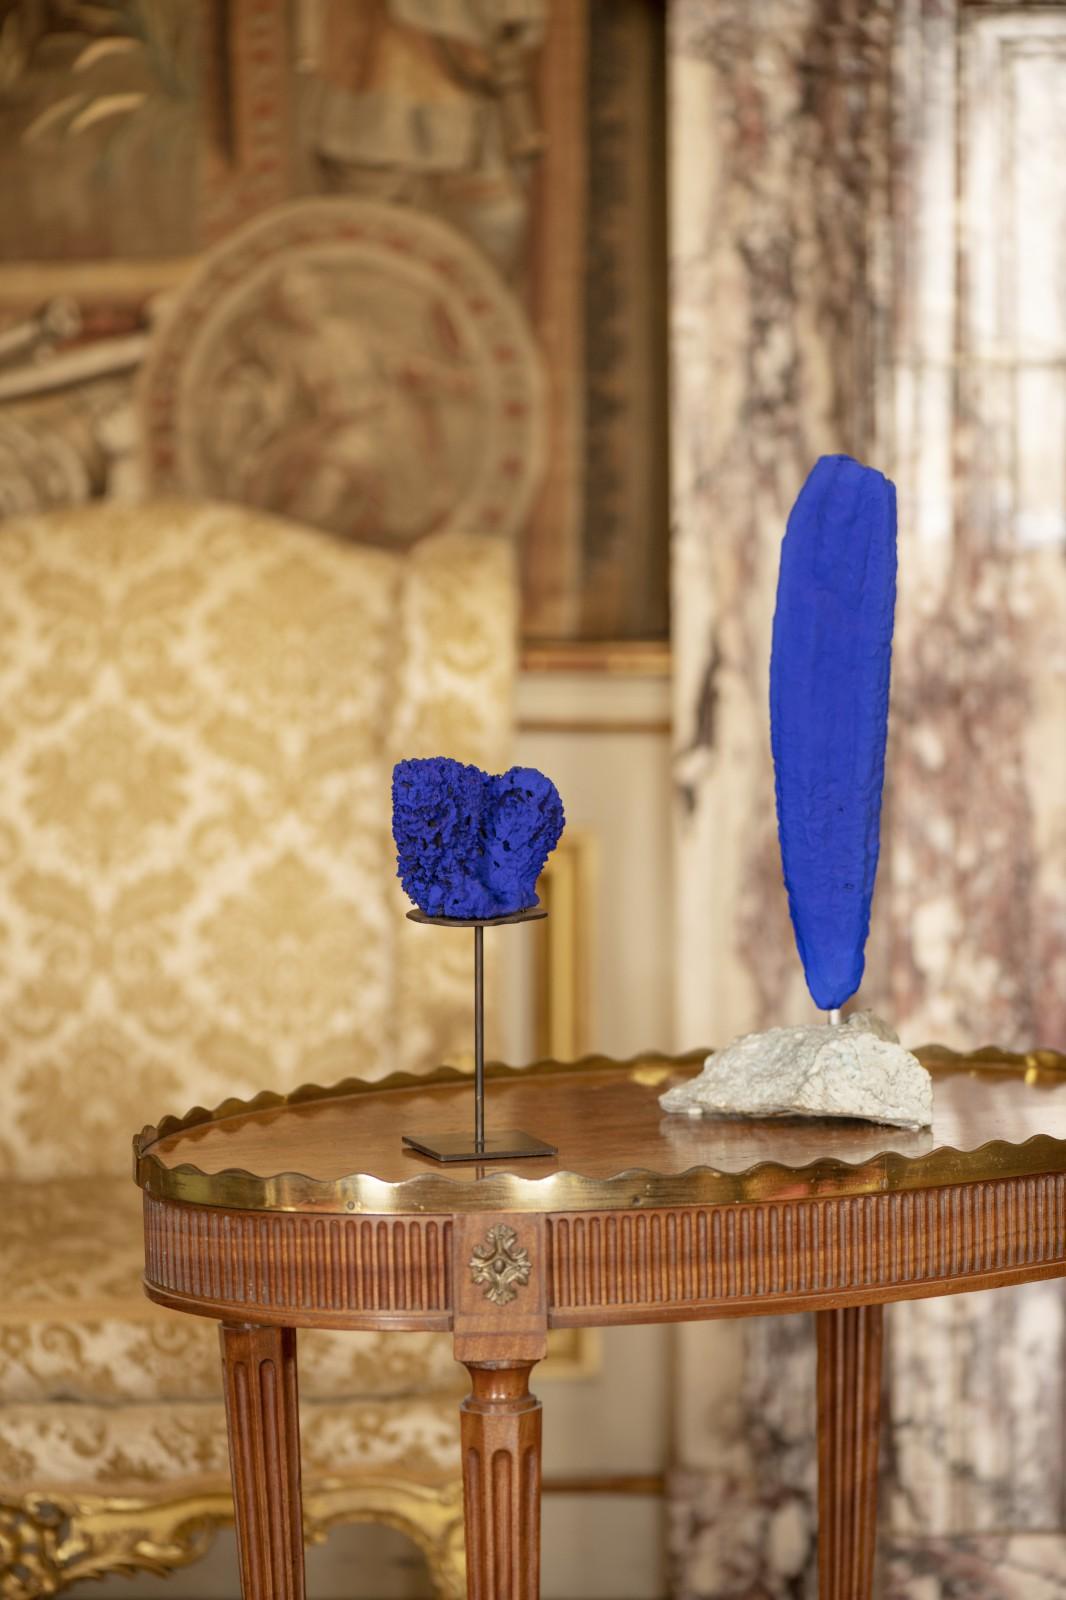 View of the exhibition "Yves Klein", Blenheim Palace, 2018 (SE 53, SE 258)